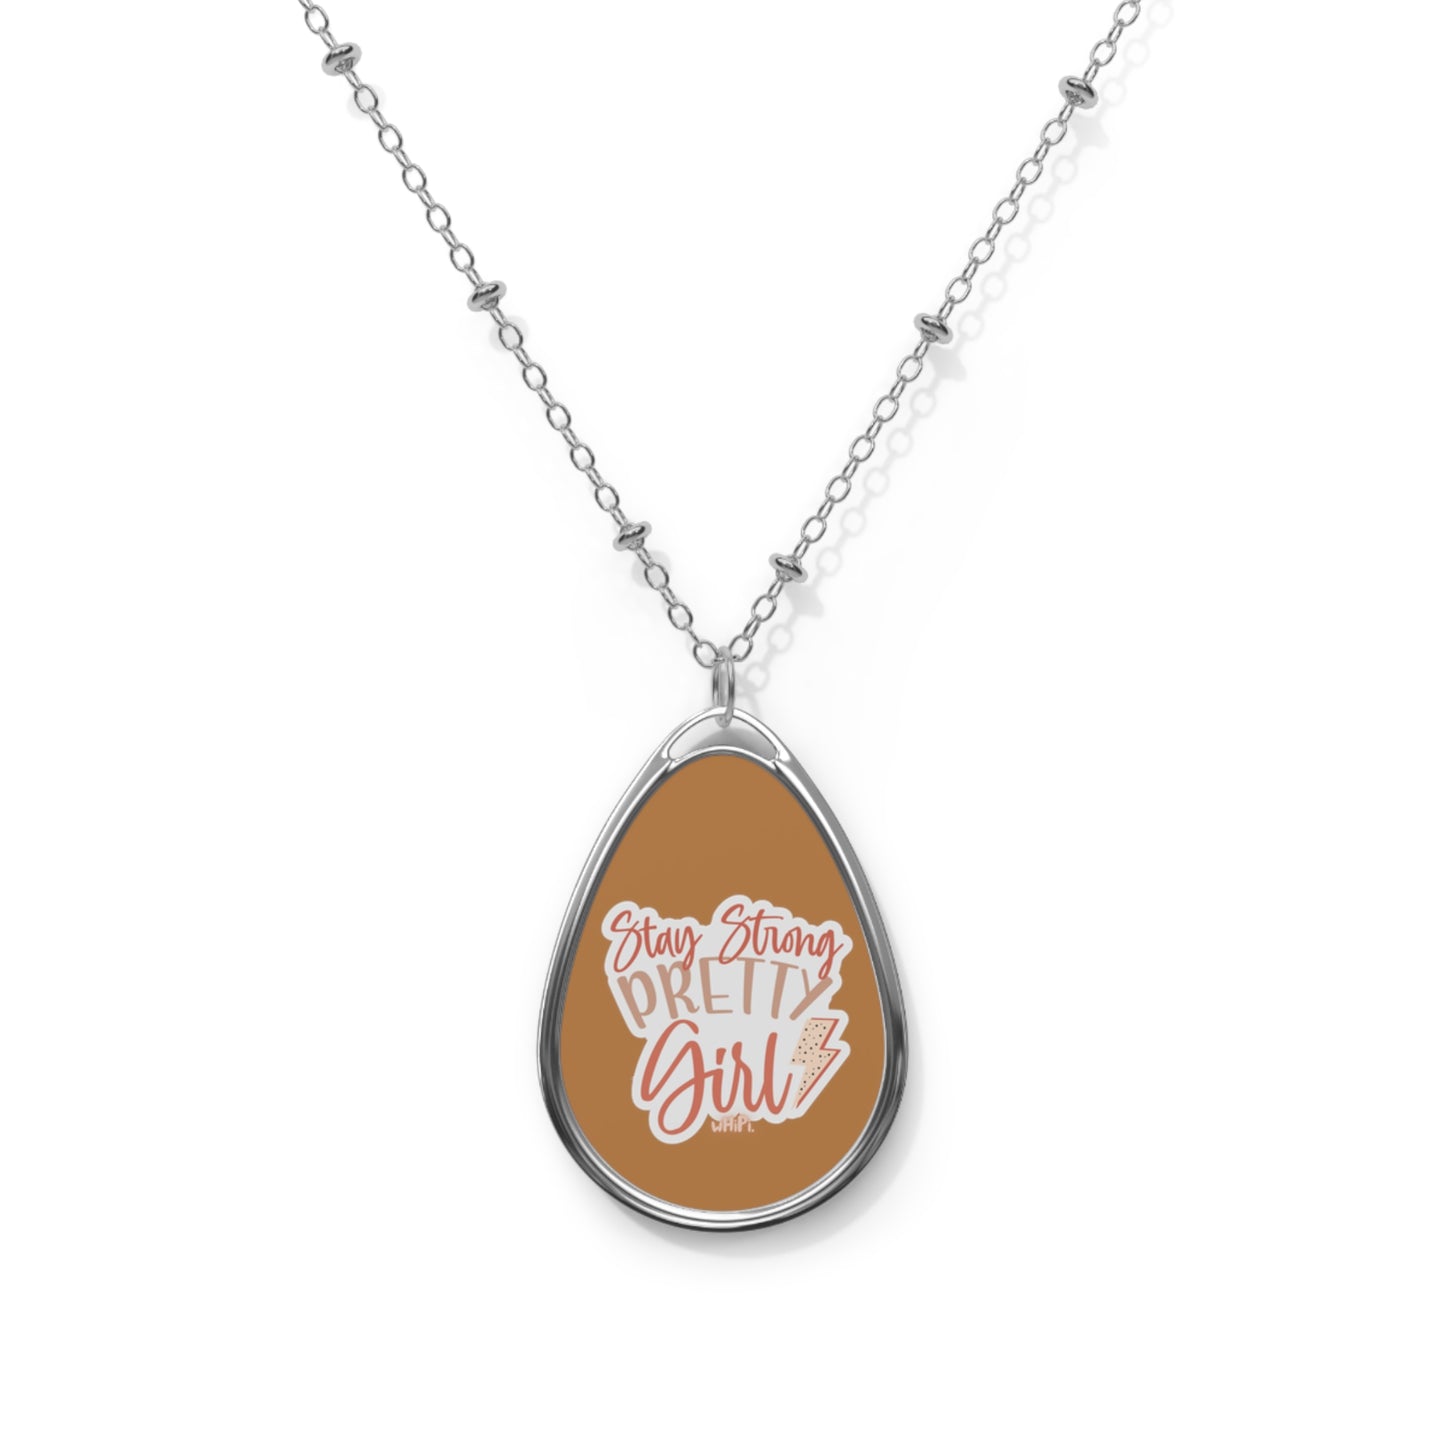 Stay Strong Pretty Girl Oval Necklace